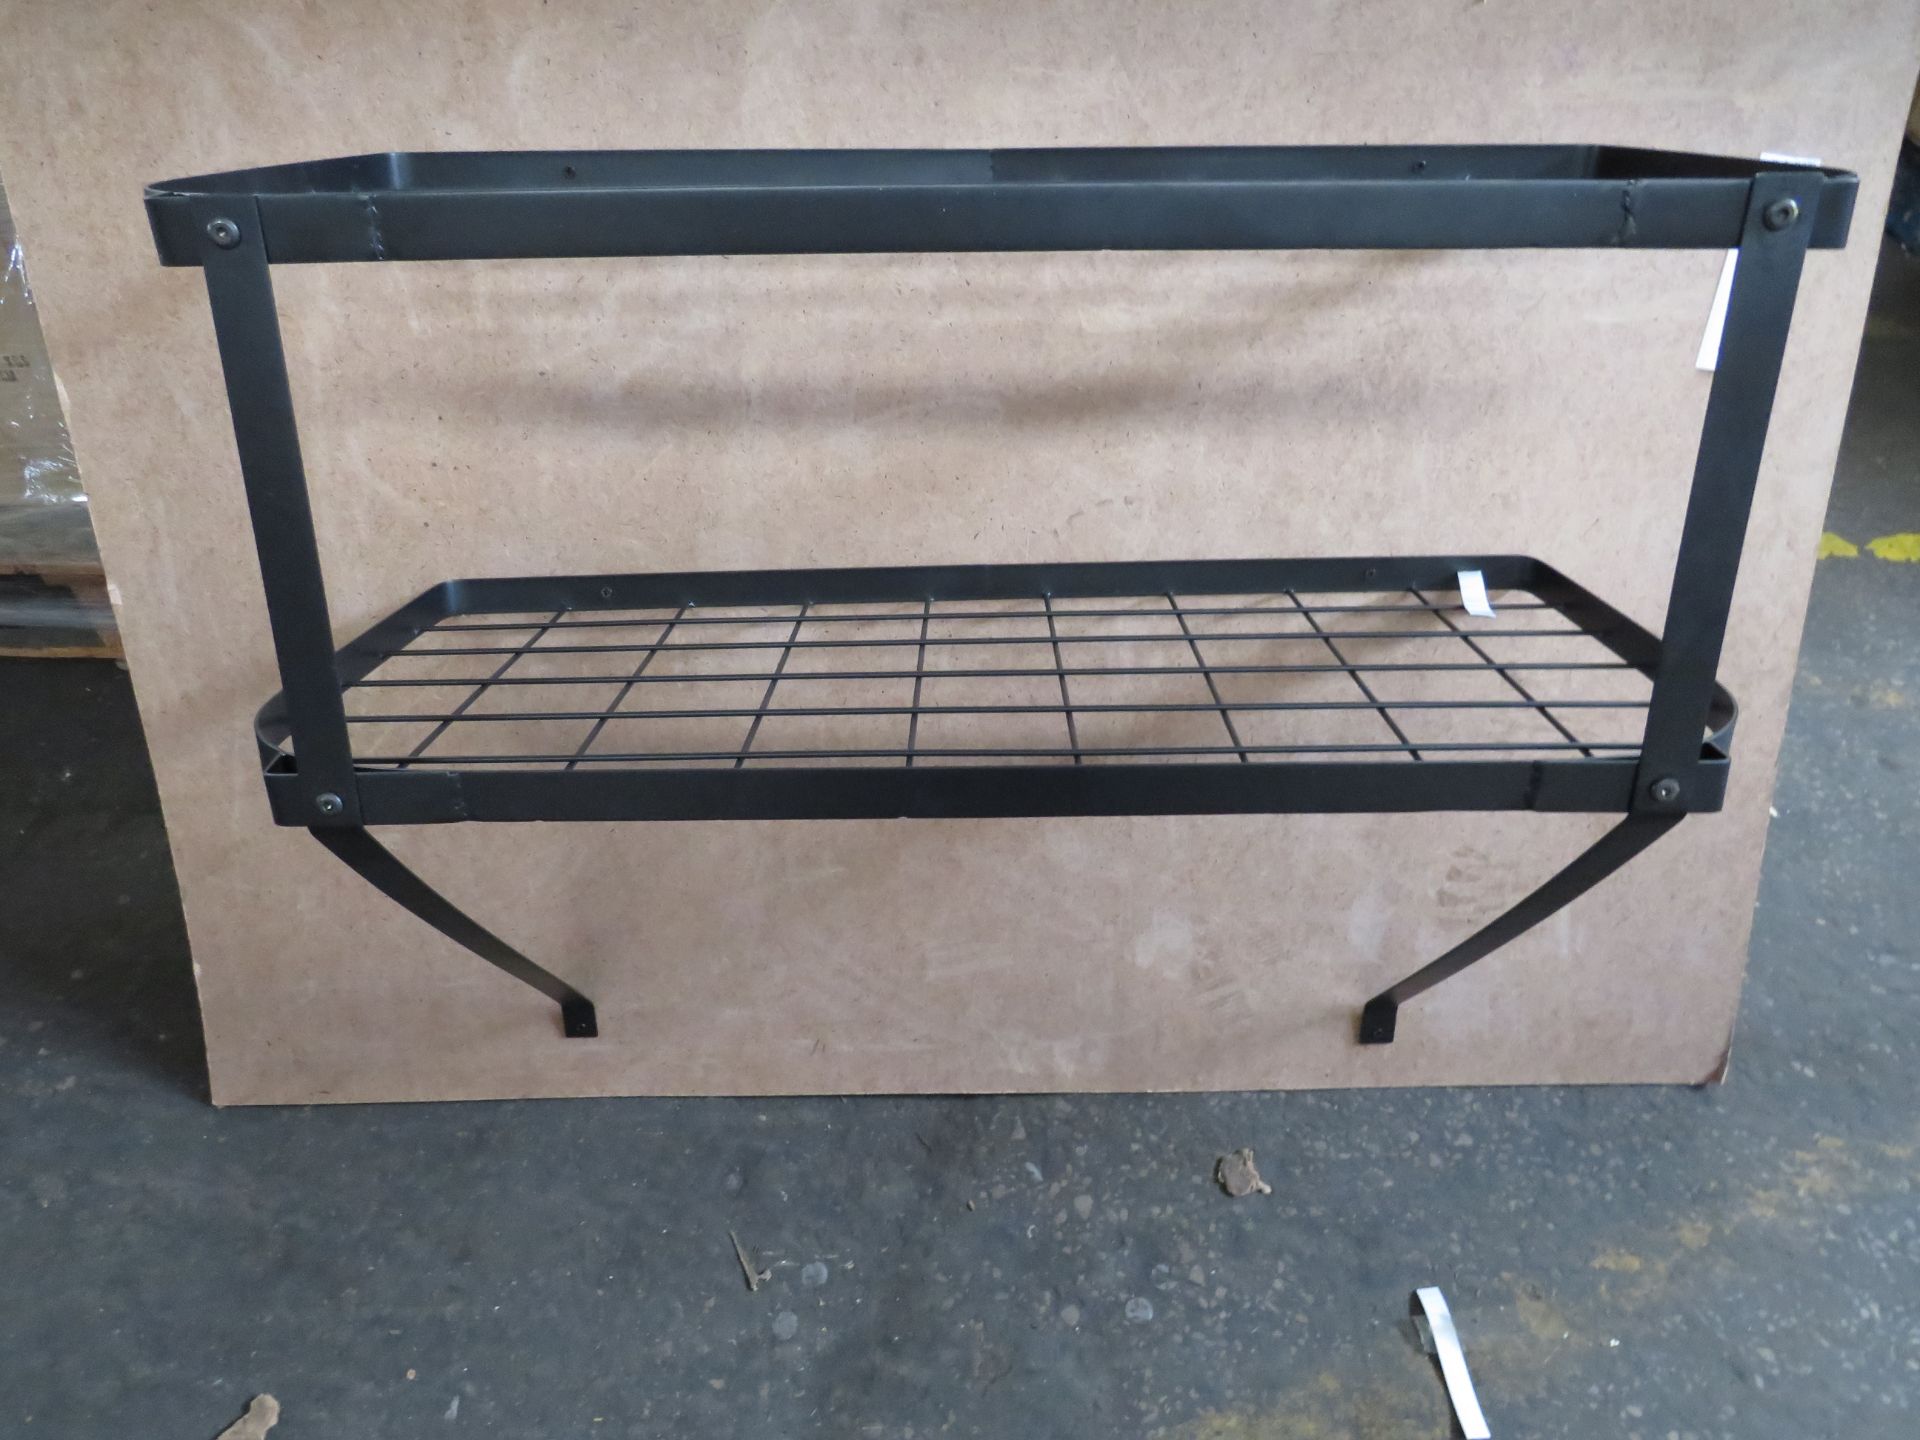 Unbranded - Black Steel Kitchen Double Shelf With Steel Hooks - Great for Pan Storage. - New &